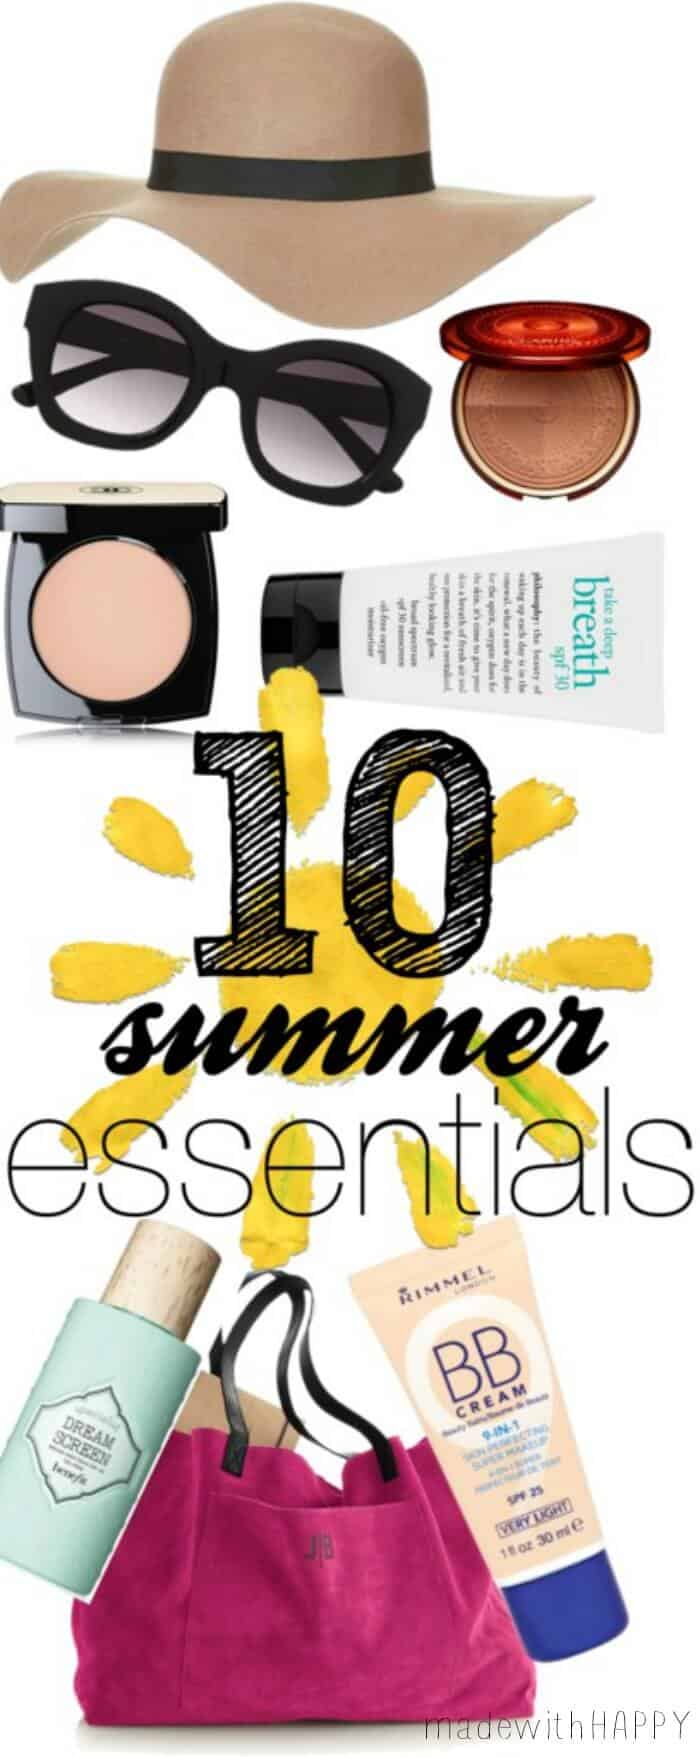 10 Summer Essentials. Your must have makeup essentials for the Summer! Before you head to the beach, make sure these items are with you!